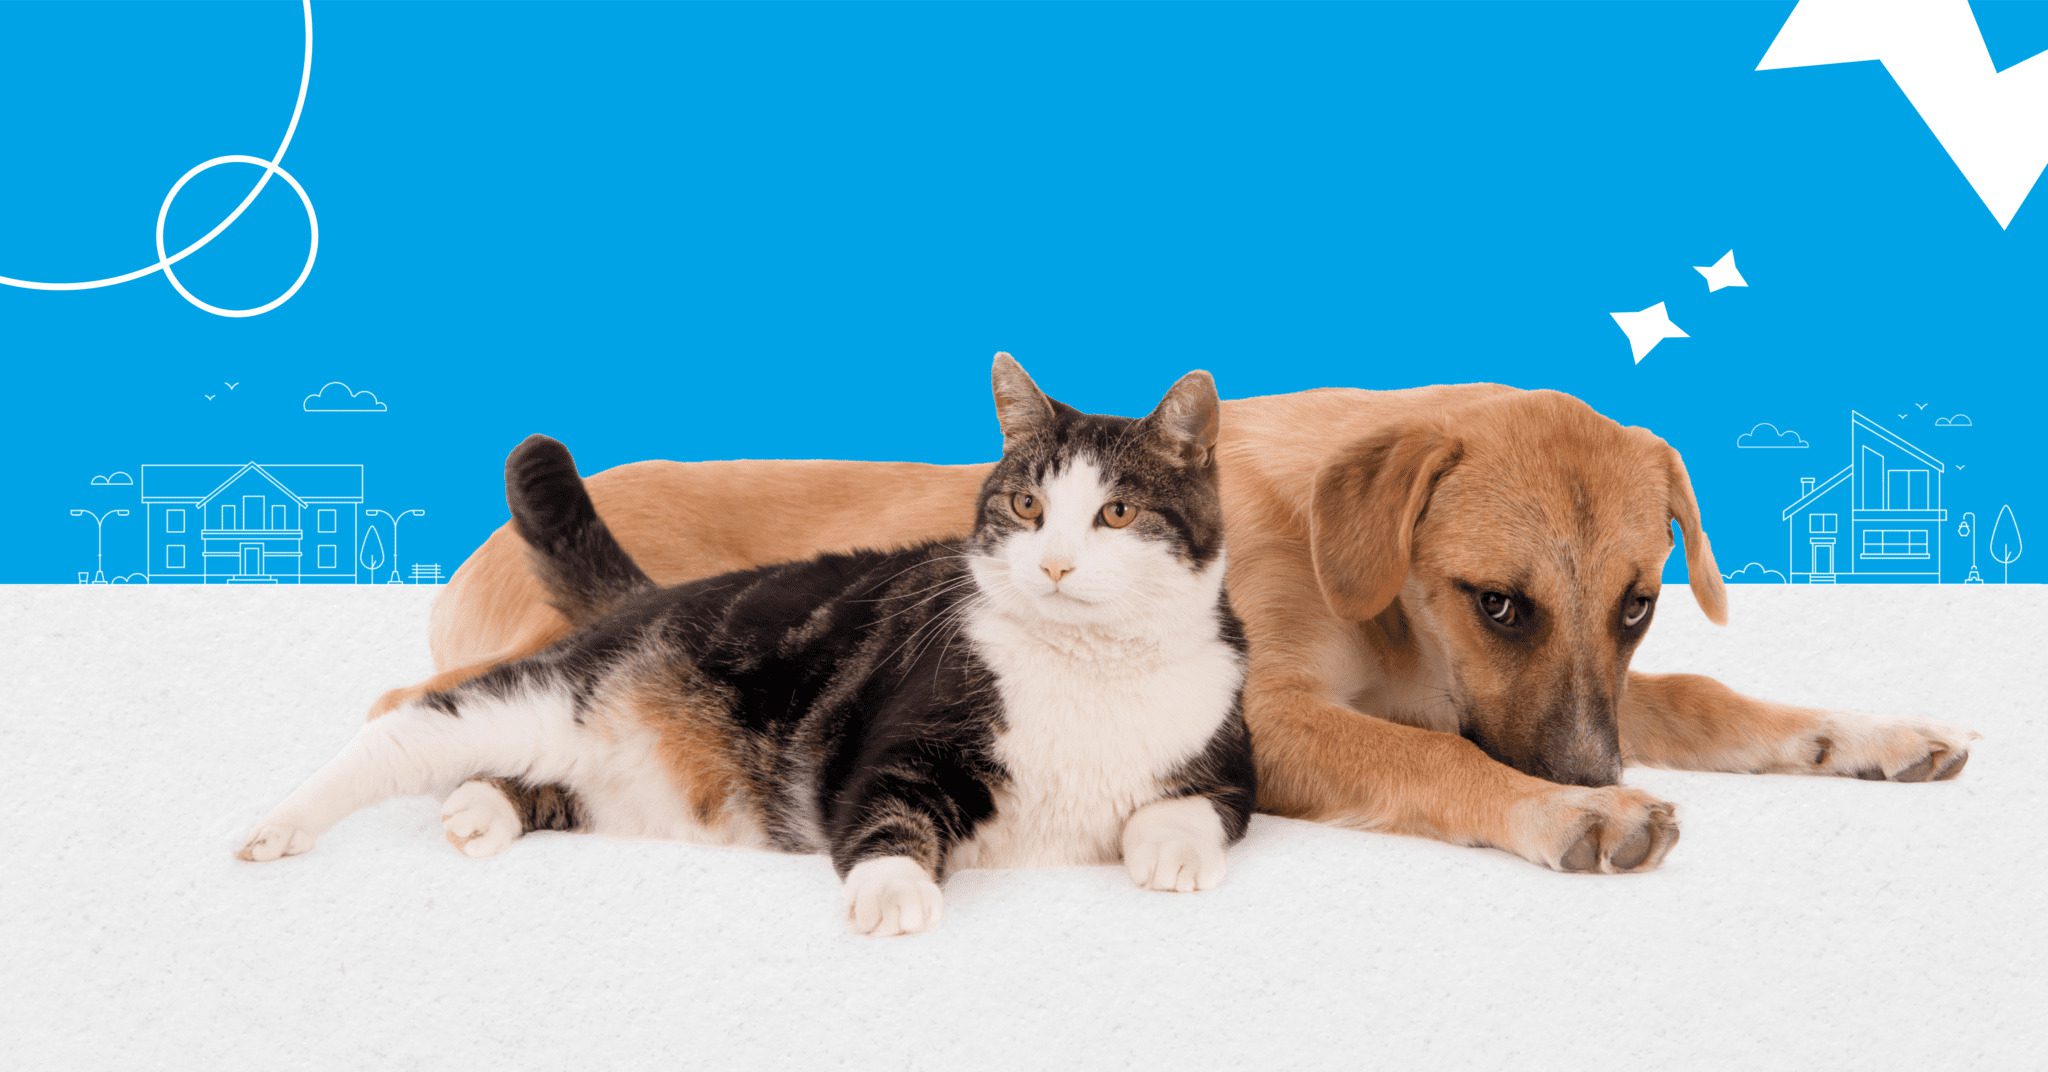 Why You Should Make Your Rental Pet-Friendly (and How)